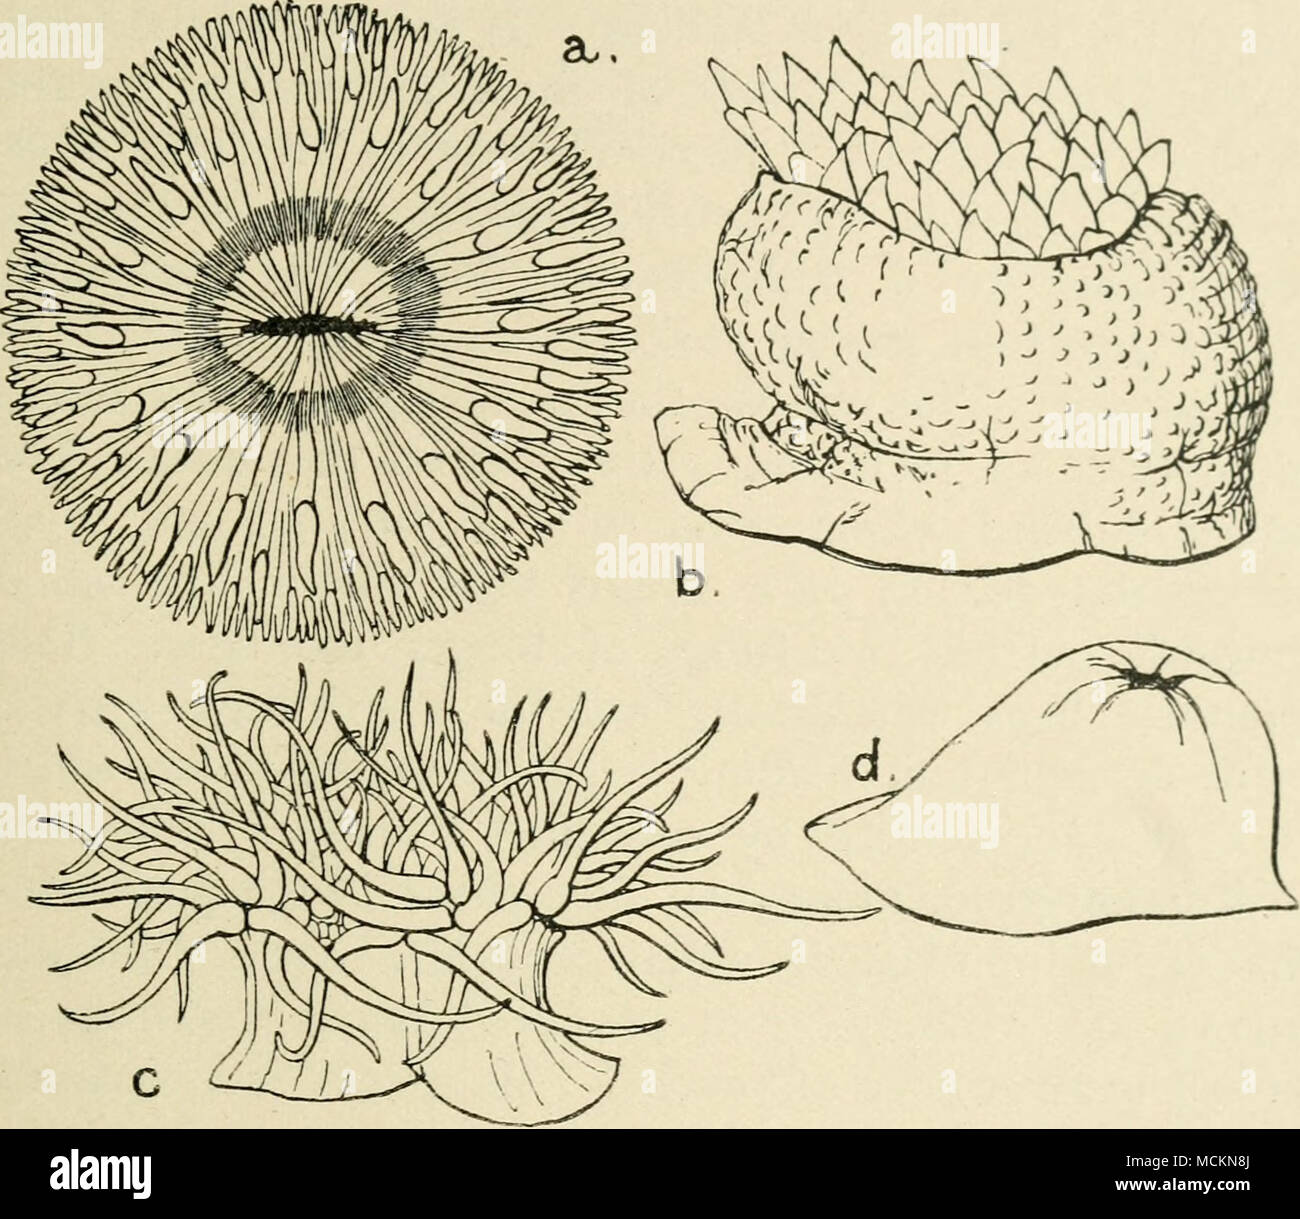 . Fig. 6.—British Sea-Anemones. a, Sagartia bellis, the daisy anemone, viewed from above when fully expanded. b, Bunodes crassicornis, half expanded ; side view. c, Anthea cereus. The tentacles are pale apple-green in colour, tipped with mauve, and cannot be completely retracted. d, Actinia mesembryanthemum. The disk of tentacles is completely retracted. This is the commonest sea-anemone on our South Coast, and is usually maroon colour, but often is spotted like a strawberry. Stock Photo